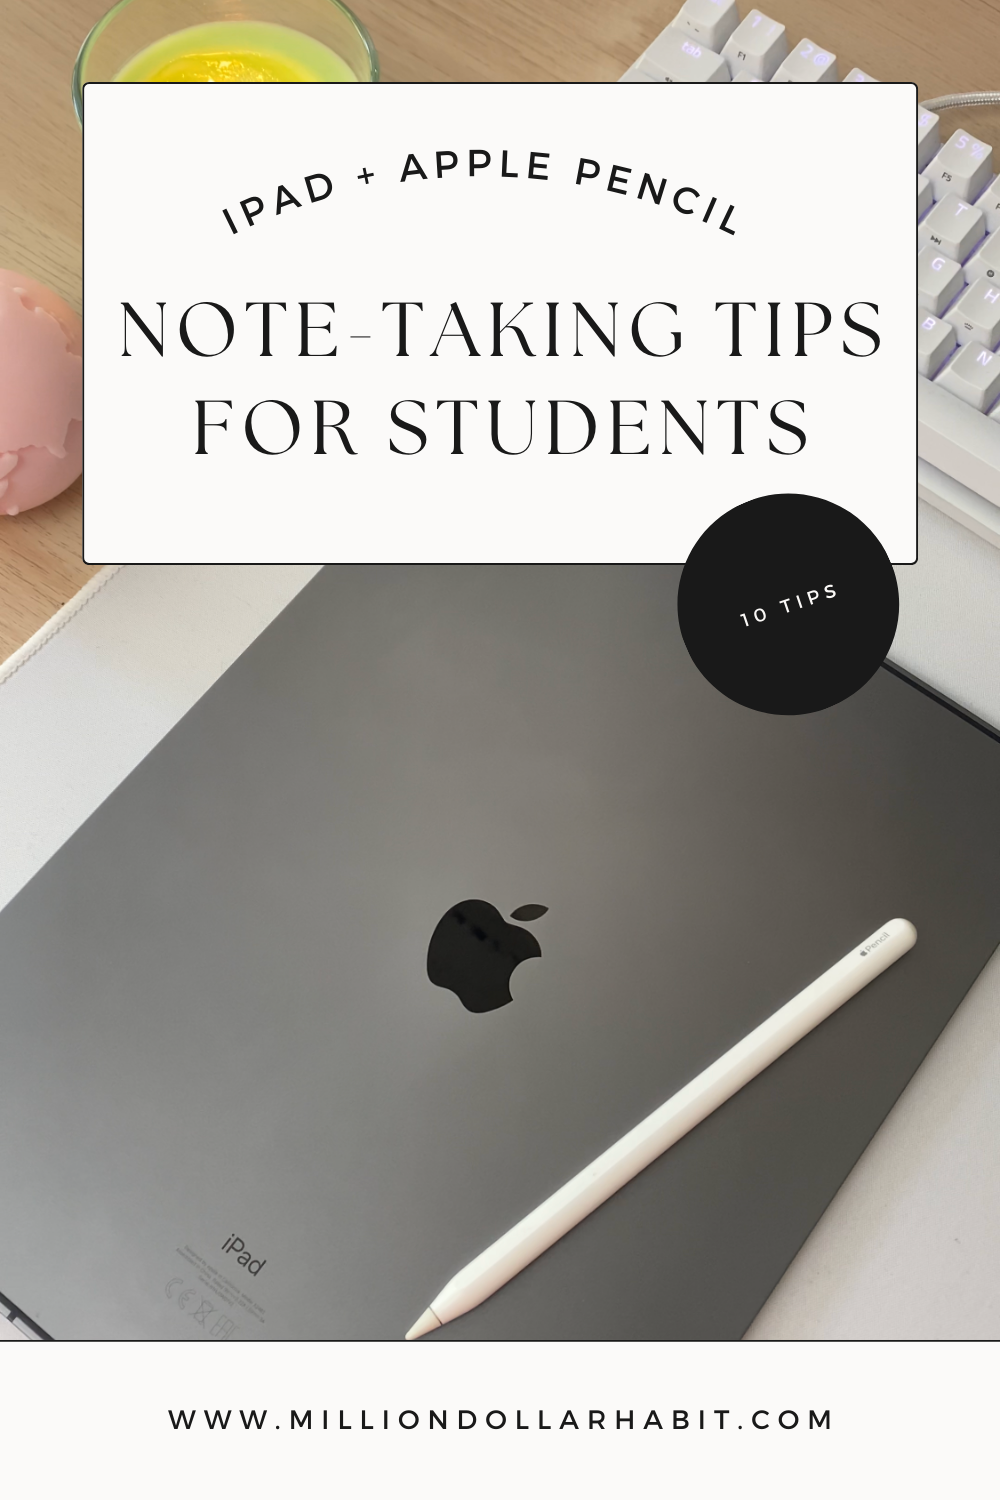 Note-Taking Tips for Students